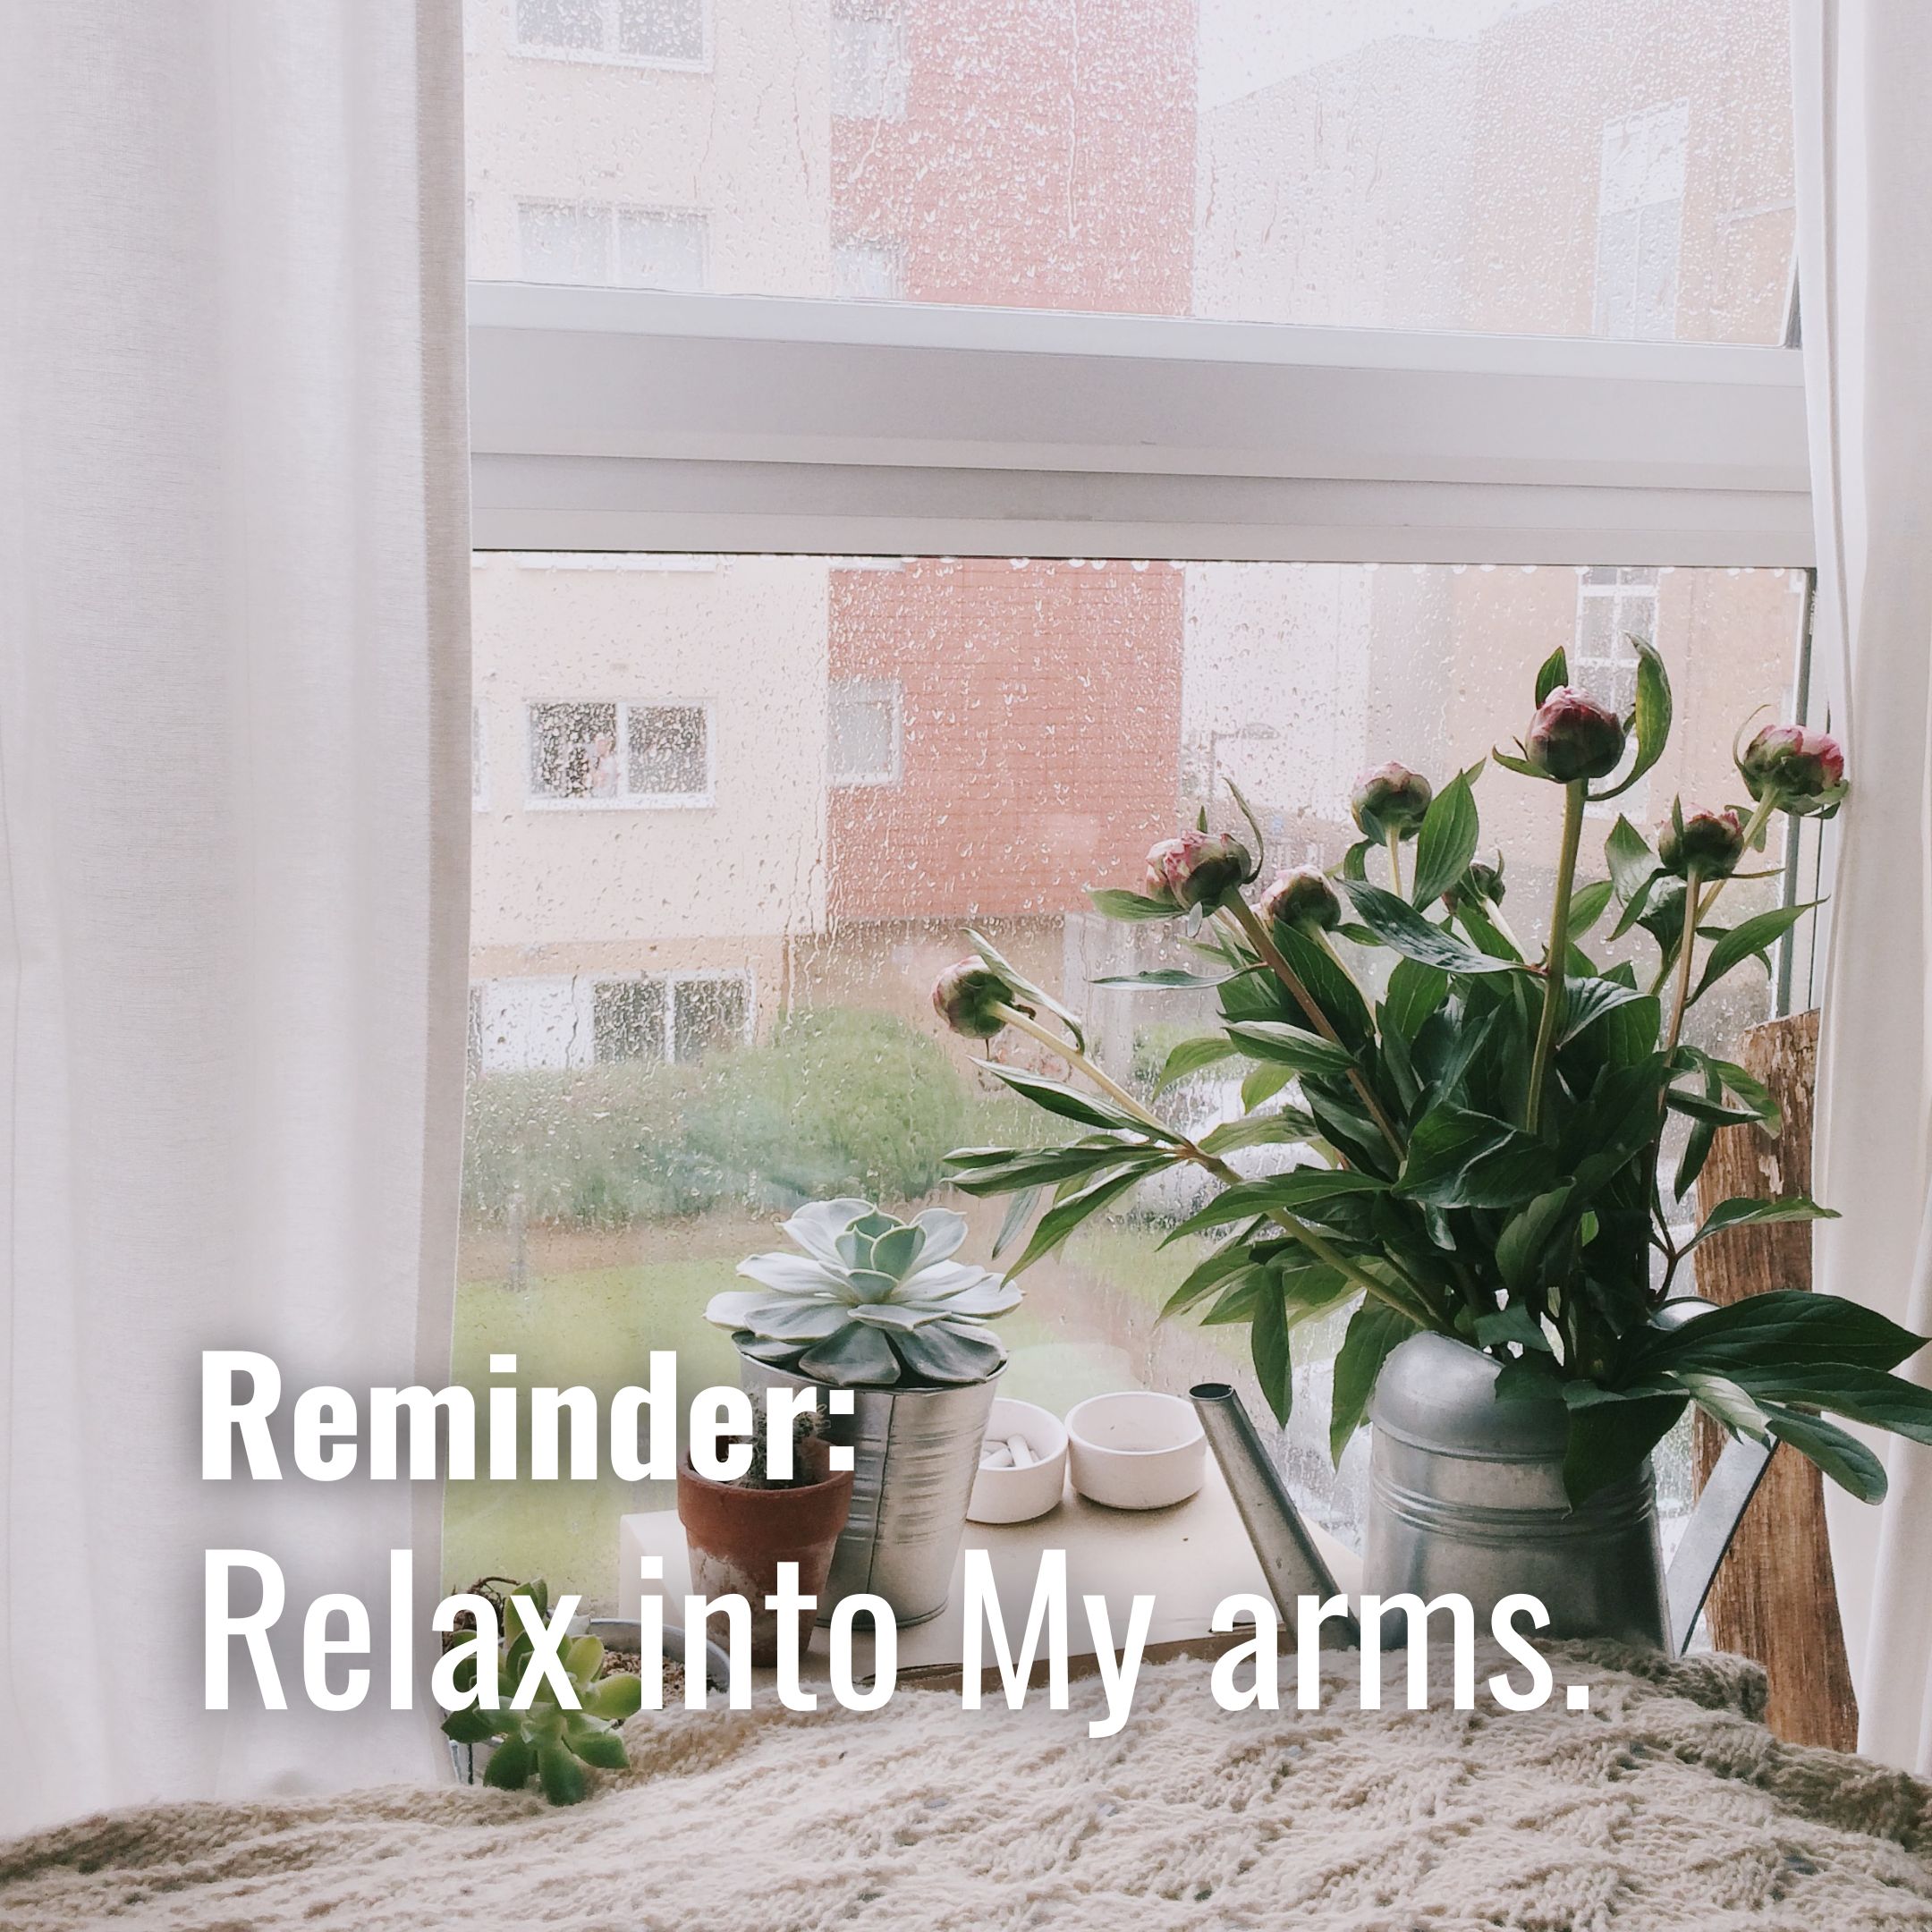 Relax into My arms.